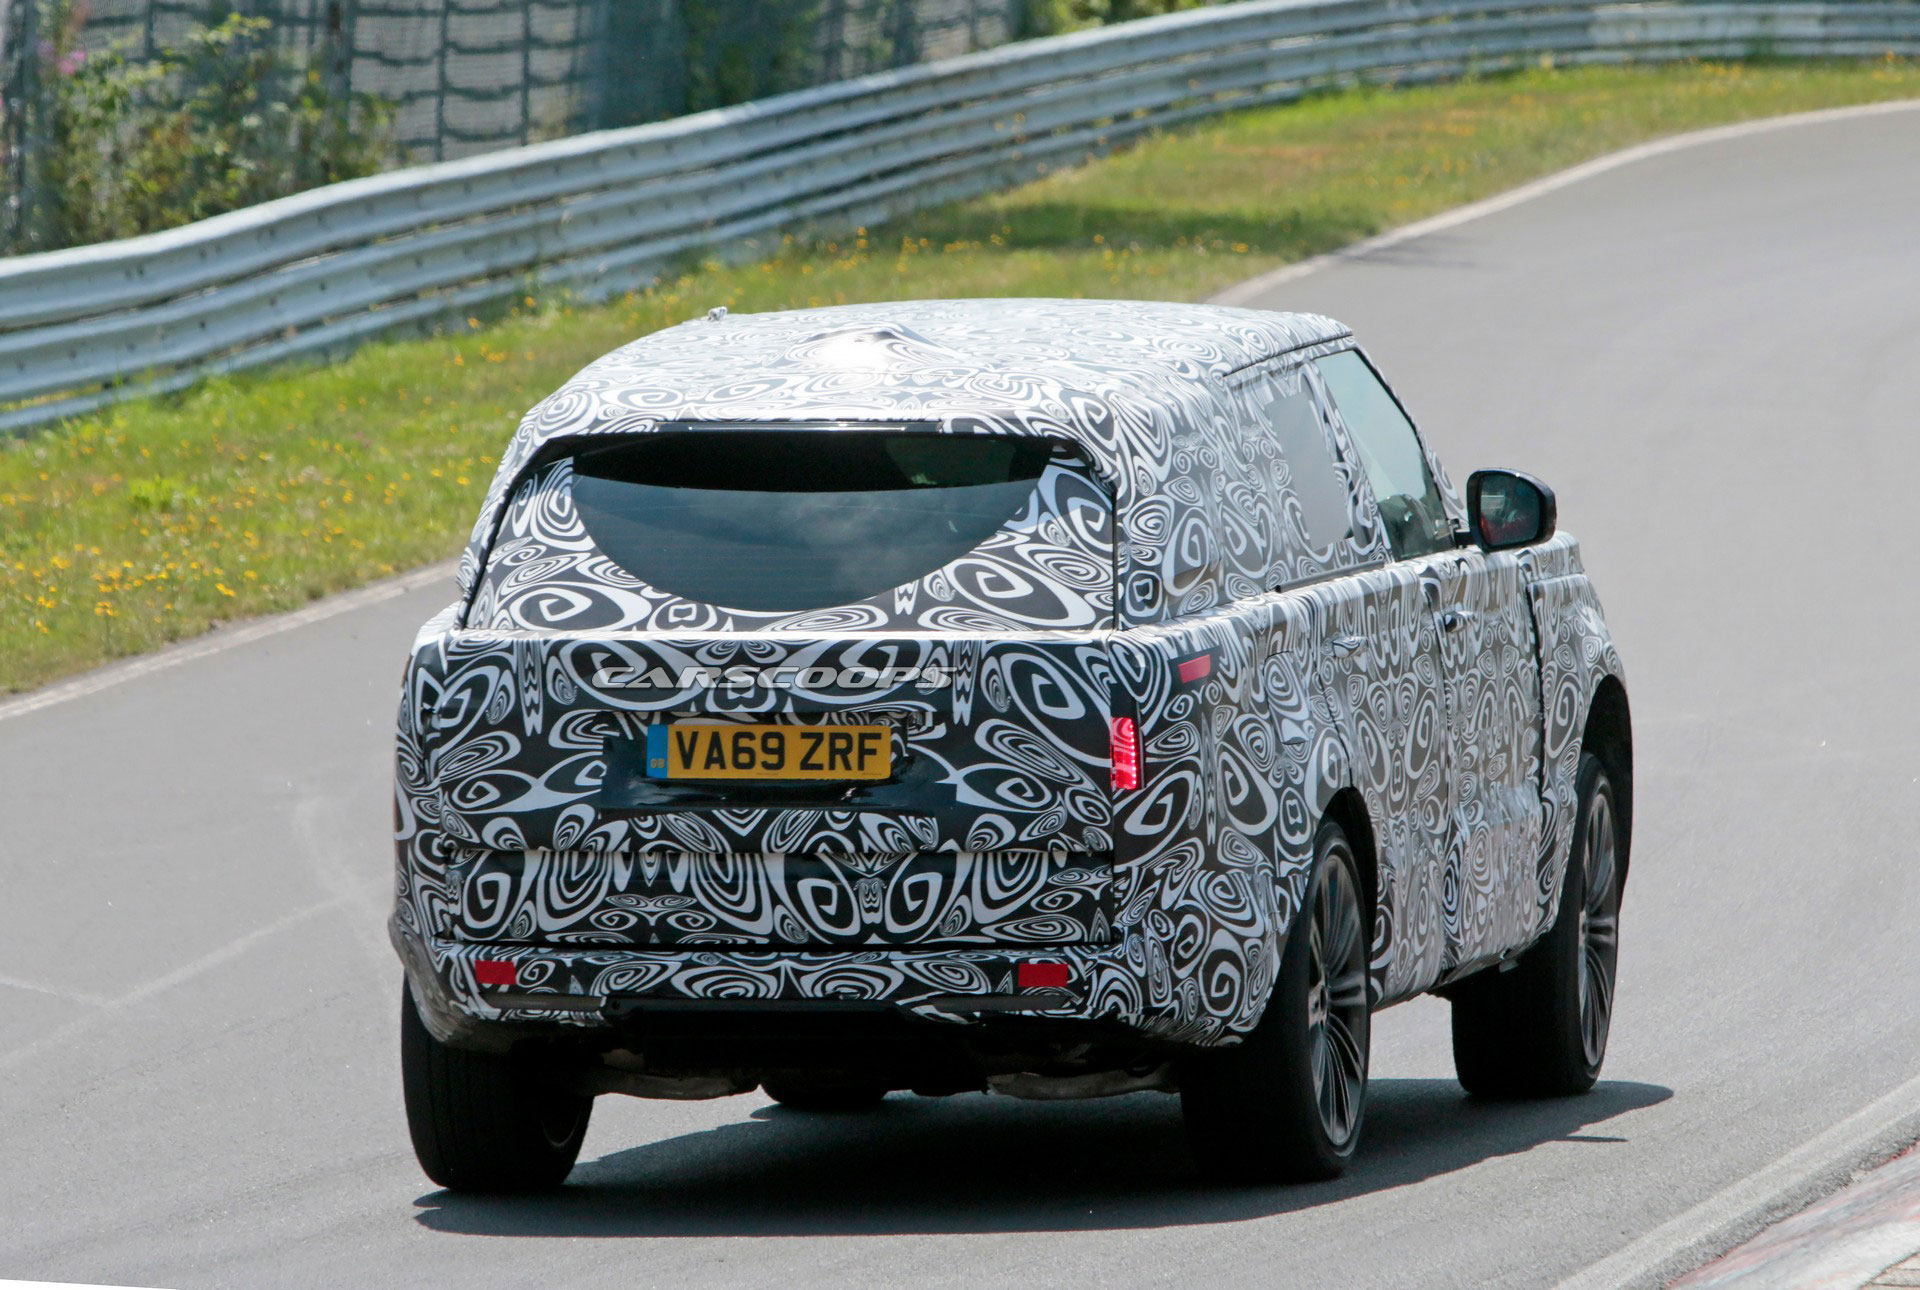 Electric Range Rover Prototypes Spotted Featuring Significantly Reduced Rooflines